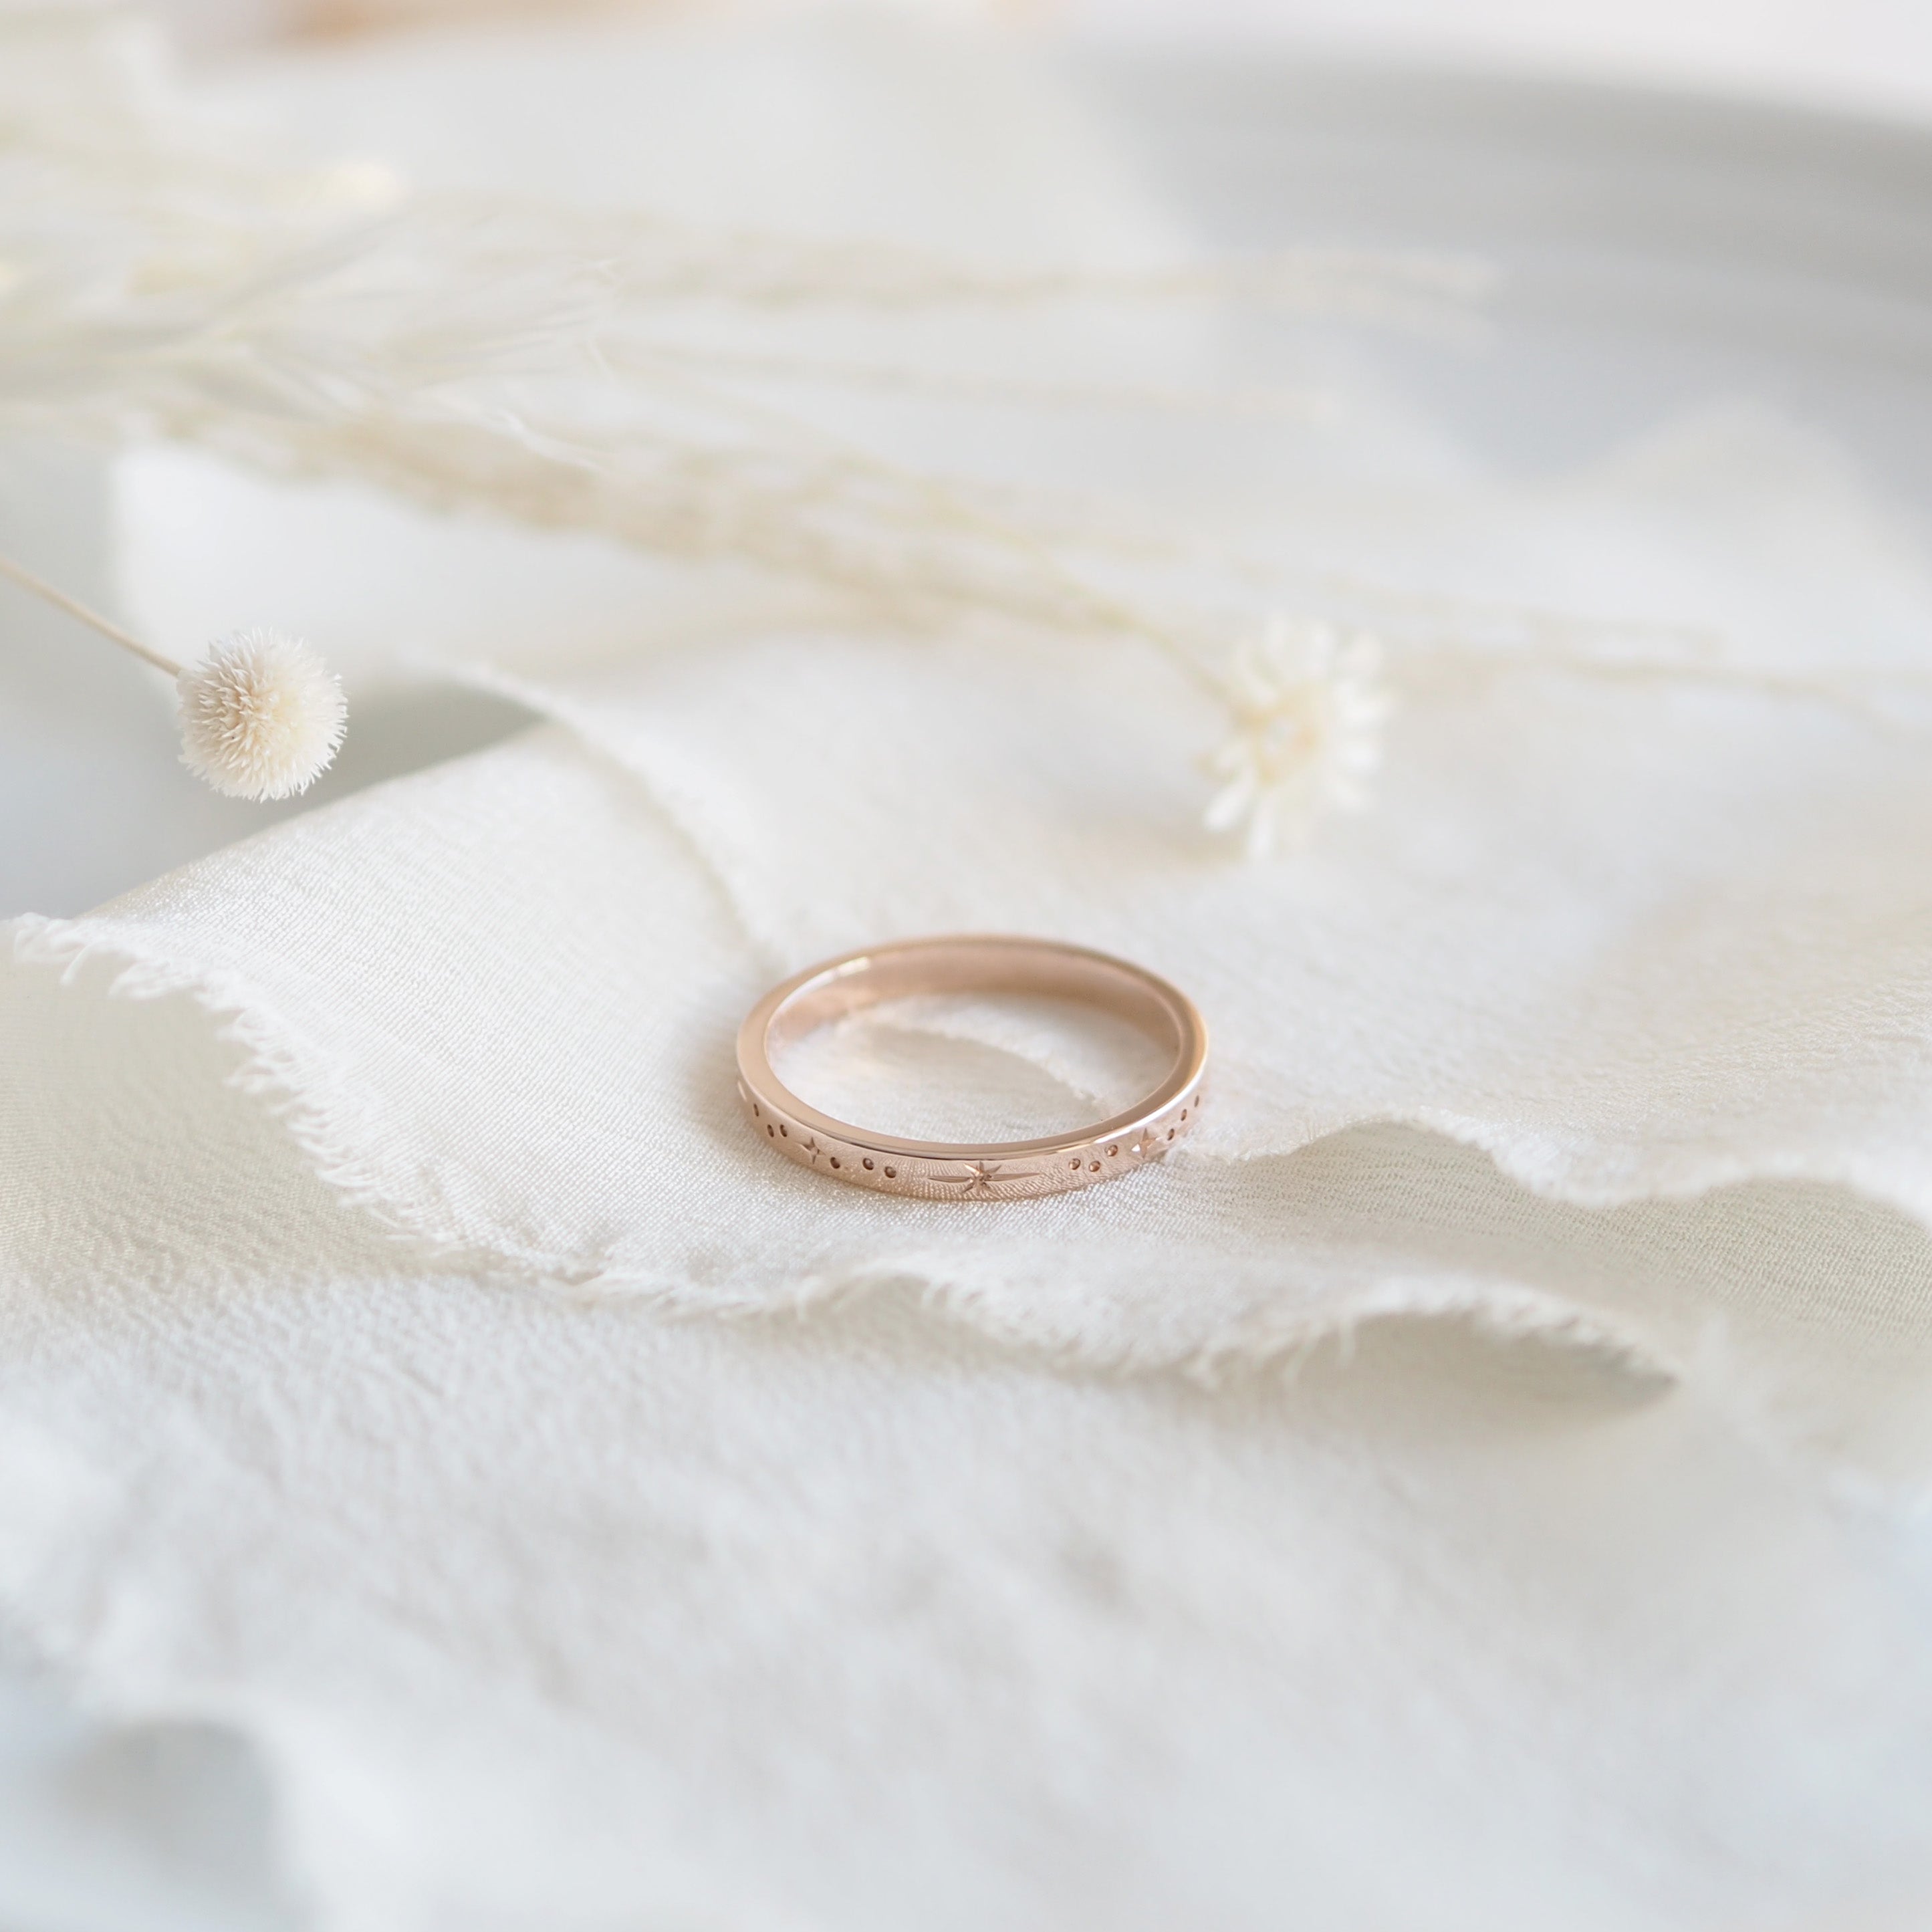 Star Engraved Flat Profile Ring Band in Solid Rose Gold